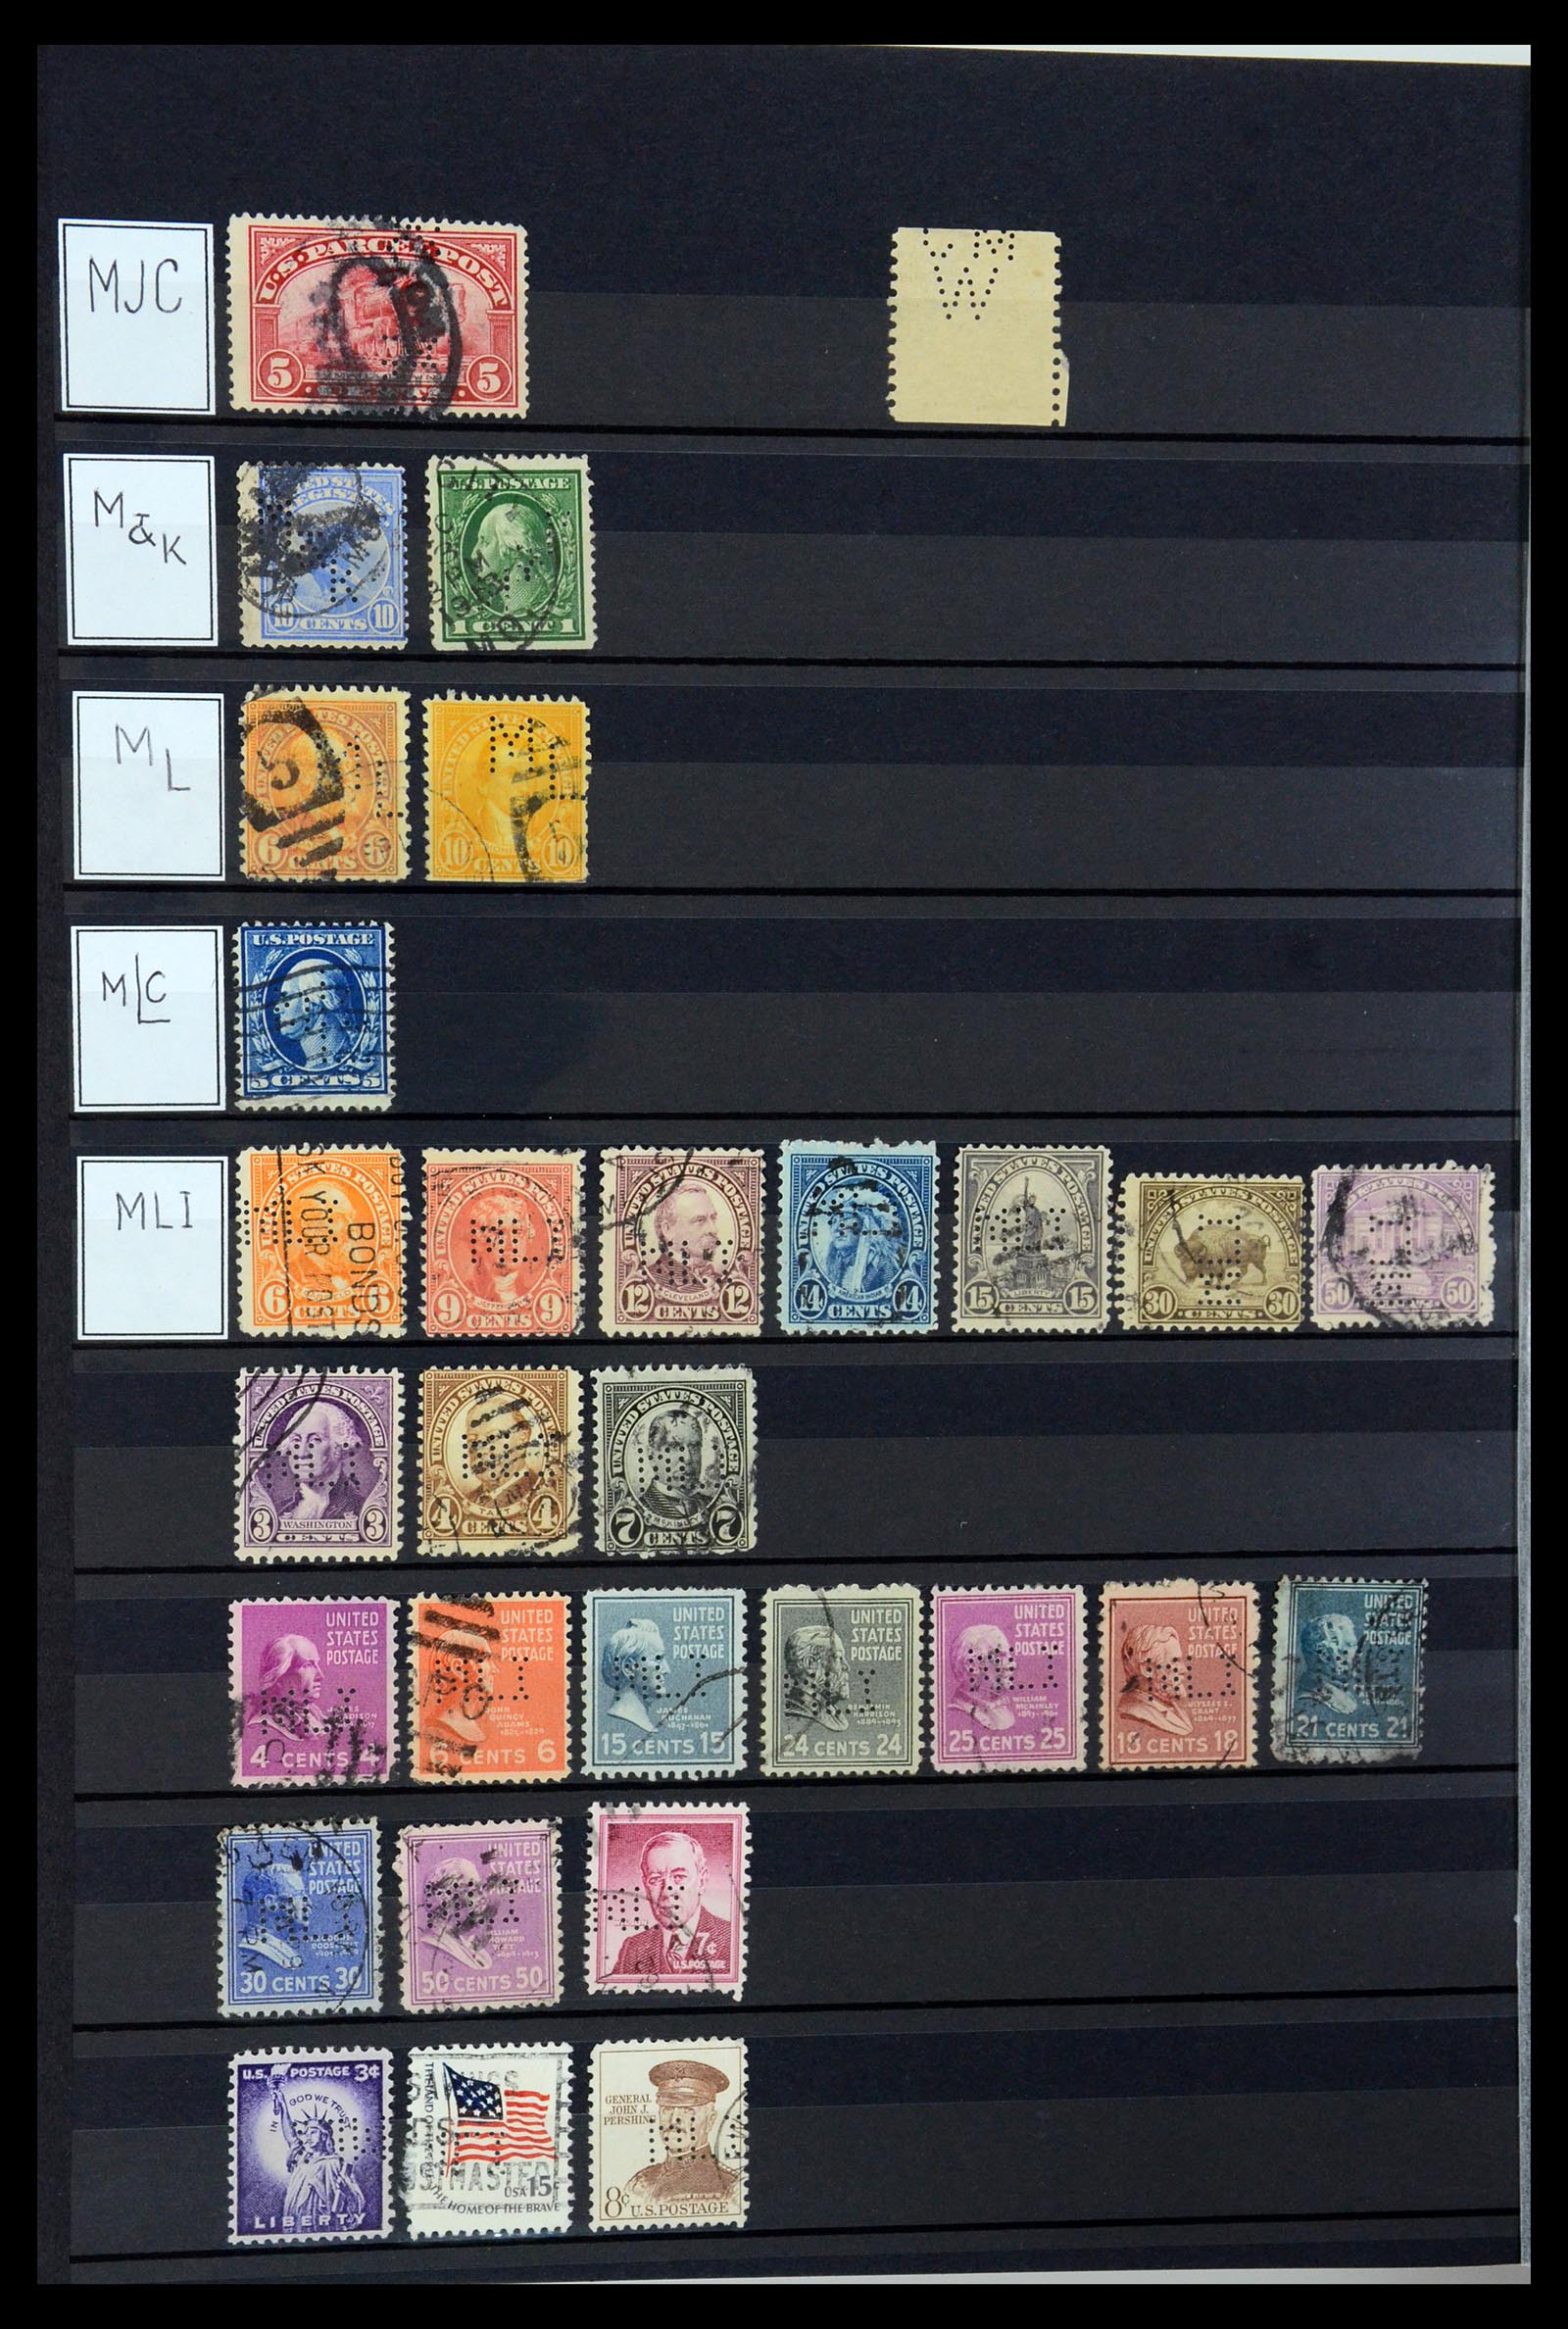 36388 088 - Stamp collection 36388 USA perfins.